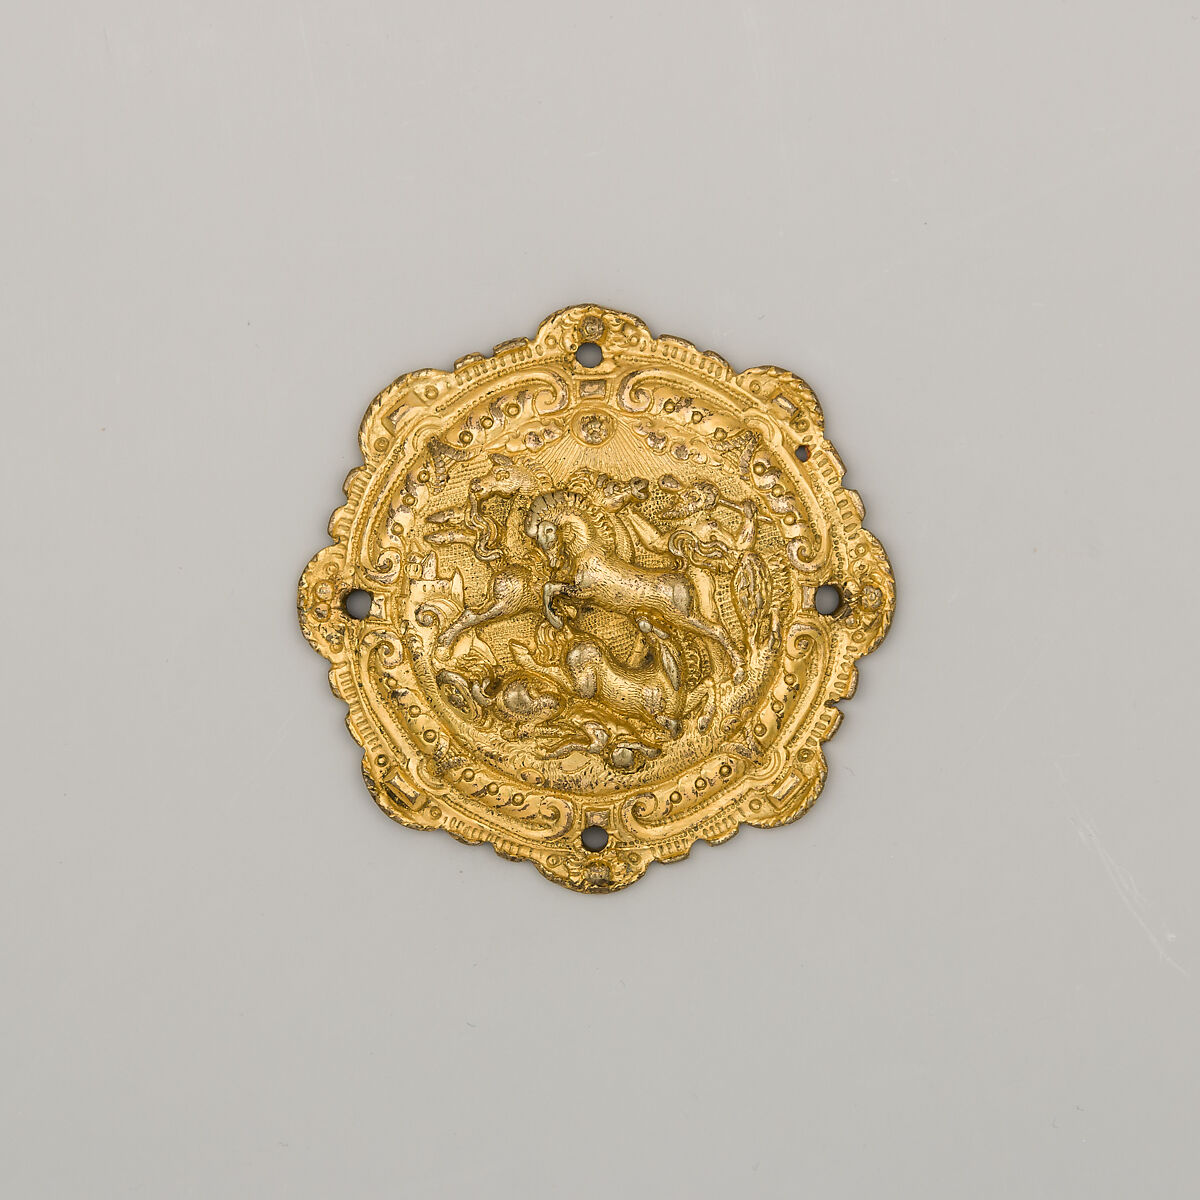 Plaquette with Hercules and Diomedes, Copper alloy, gold, German, probably Augsburg 